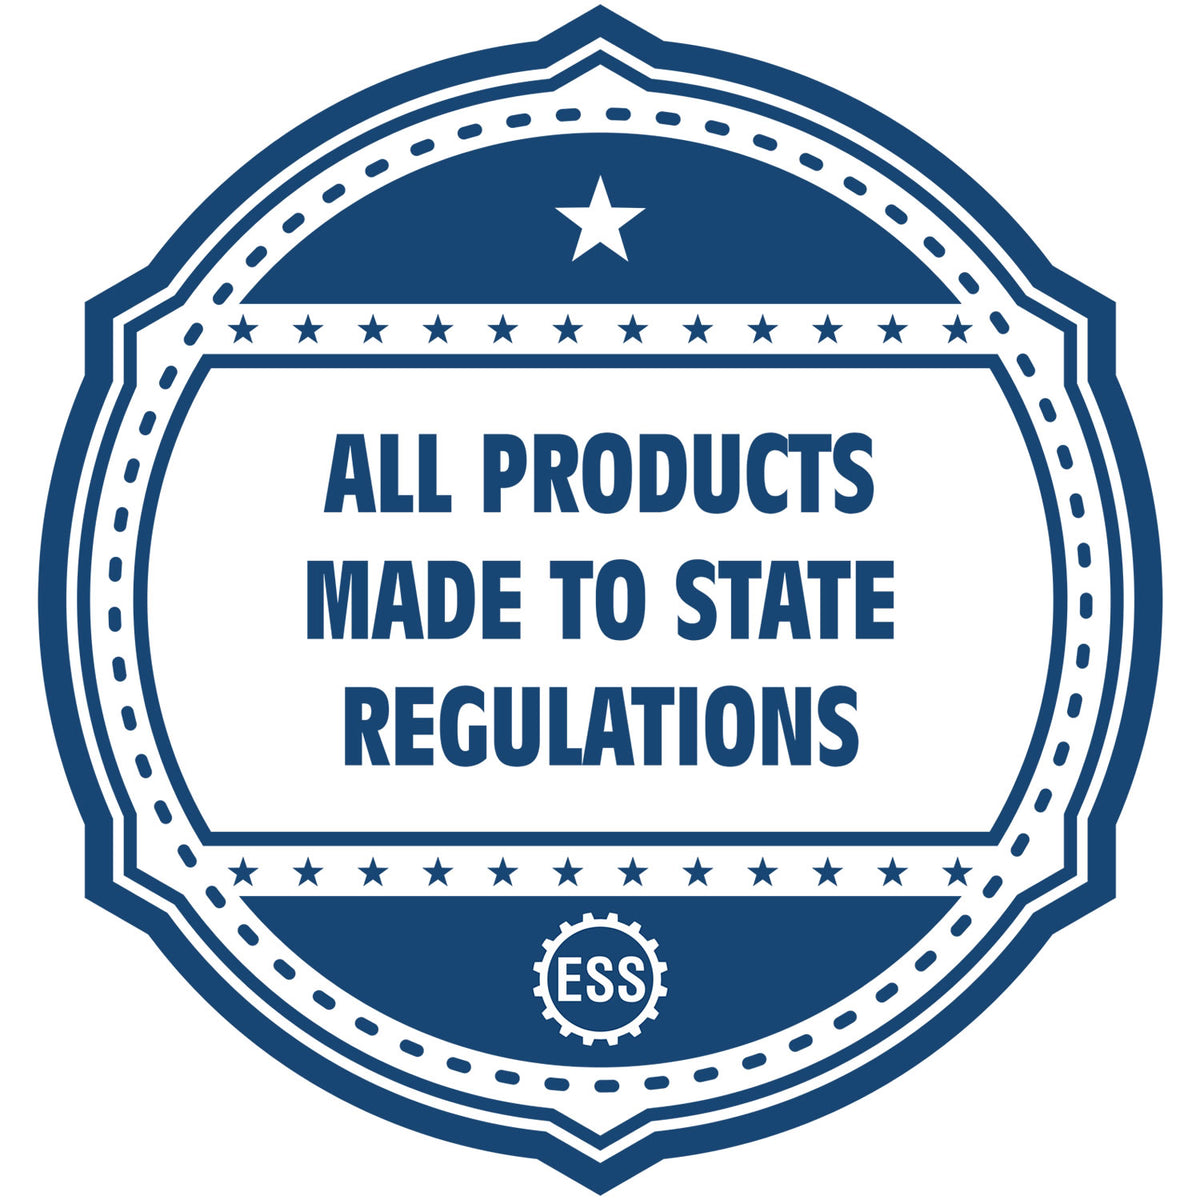 A blue icon or badge for the Slim Pre-Inked Kansas Professional Geologist Seal Stamp showing that this product is made in compliance with state regulations.